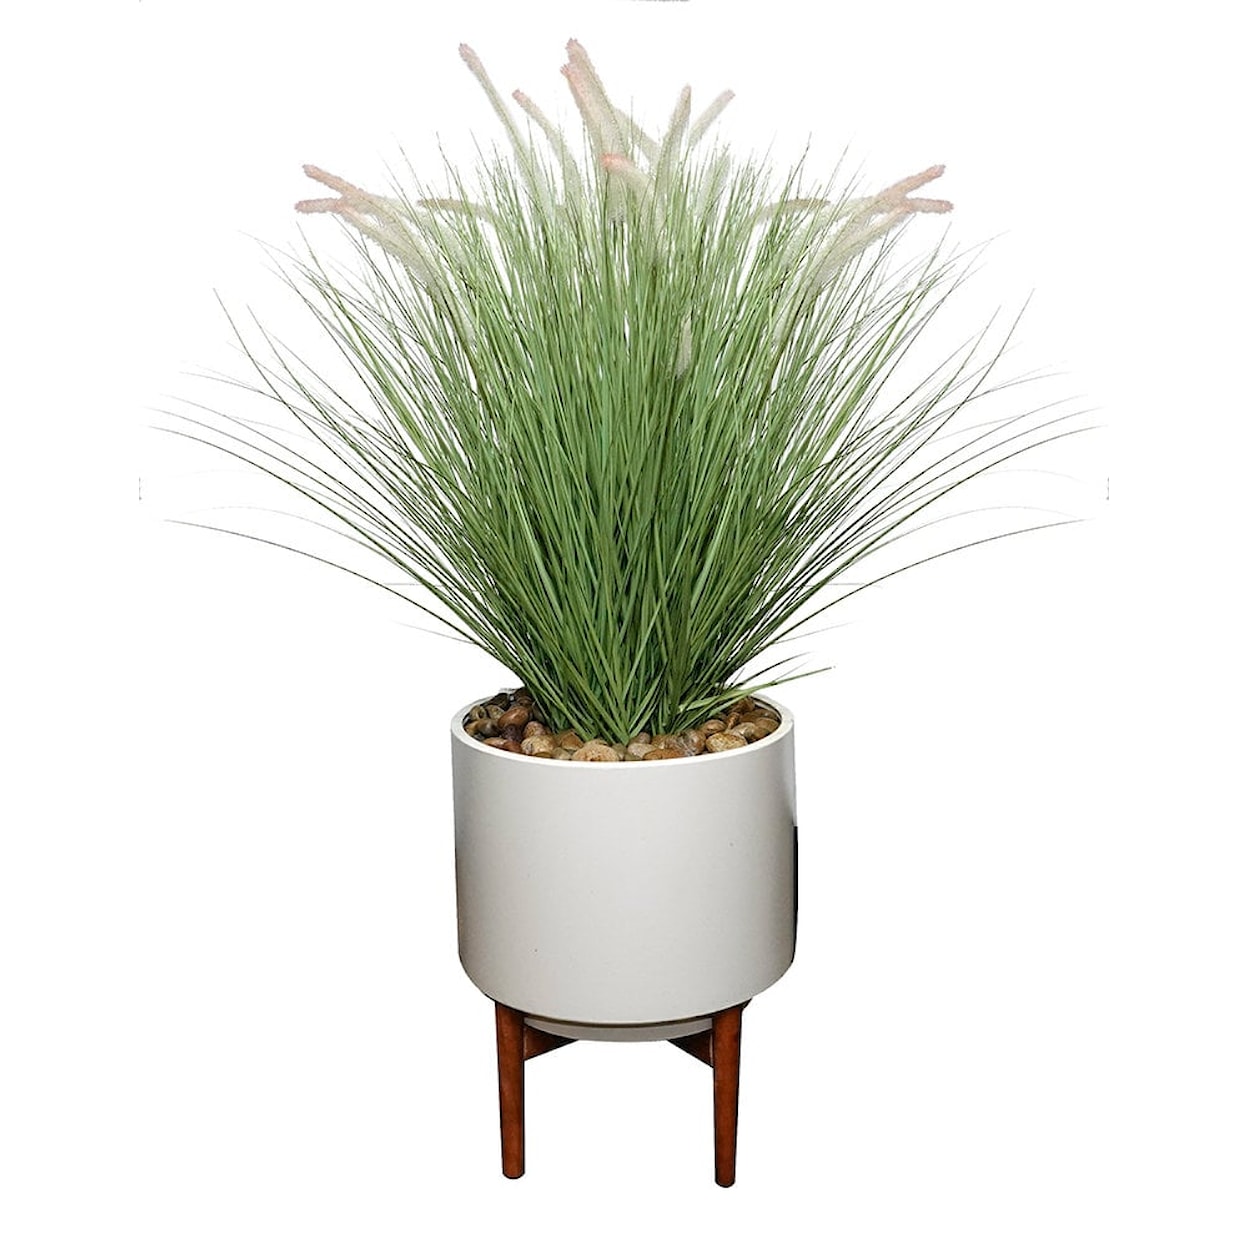 The Ivy Guild Botanicals FOUNTAIN GRASS SMALL